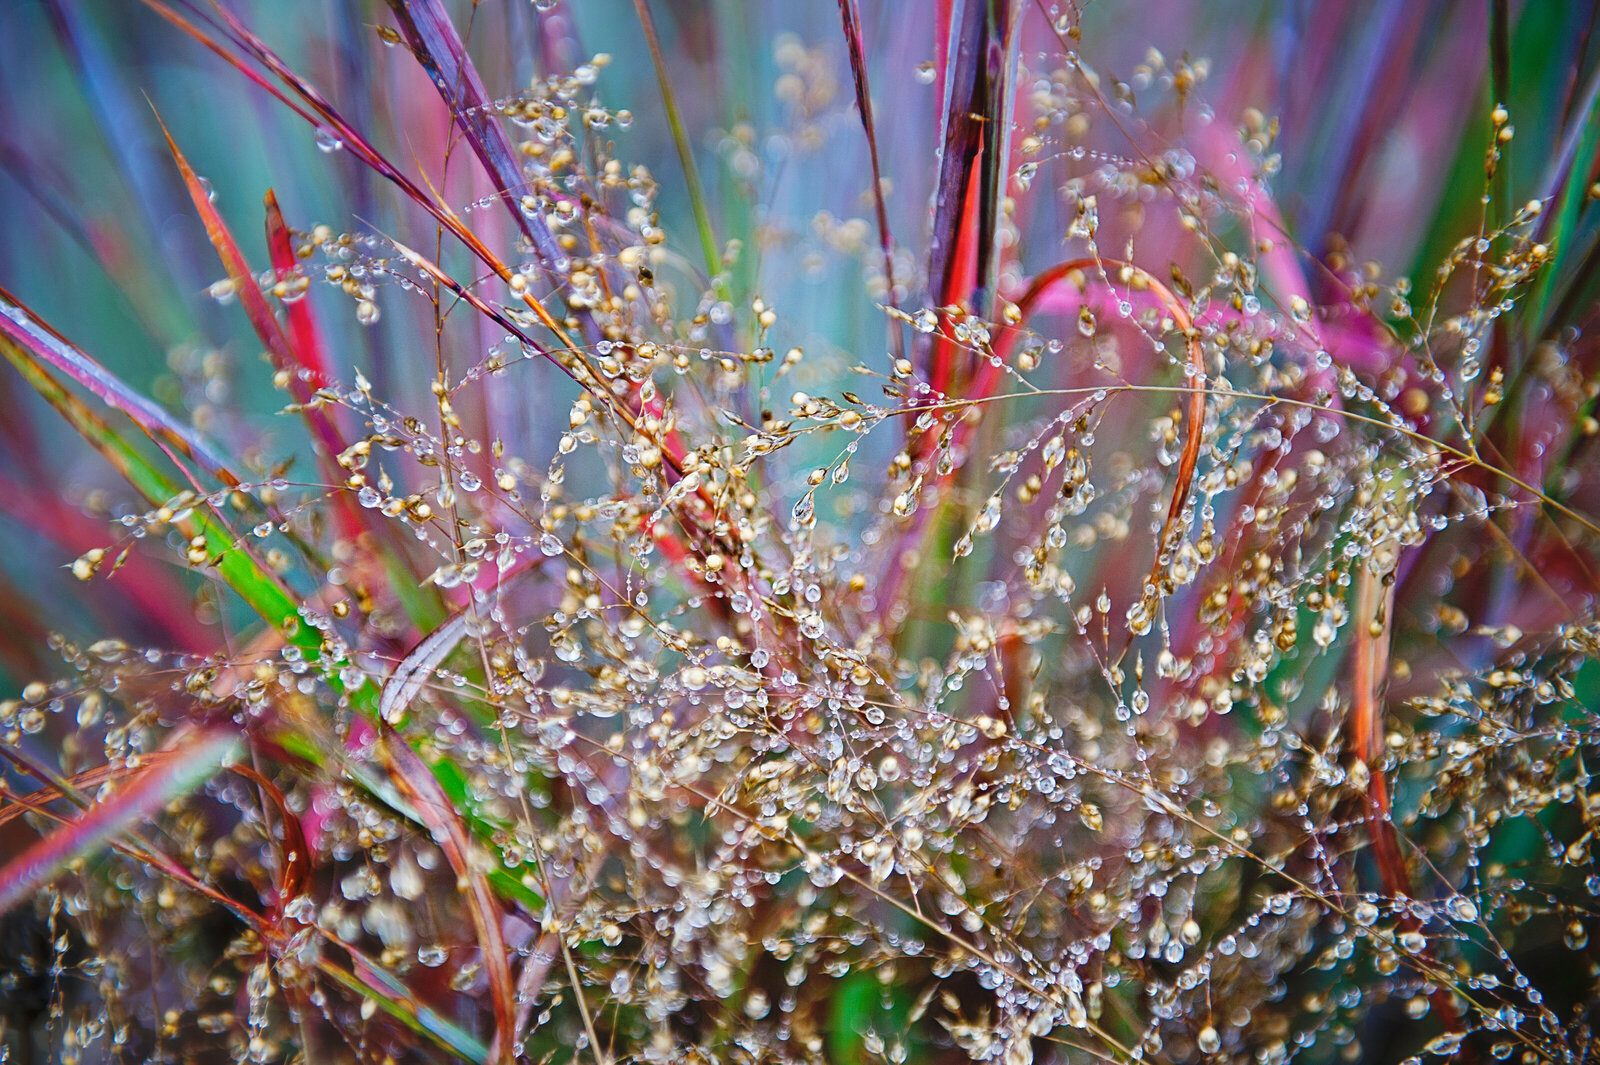 liz allen photography water droplets on grasses-2